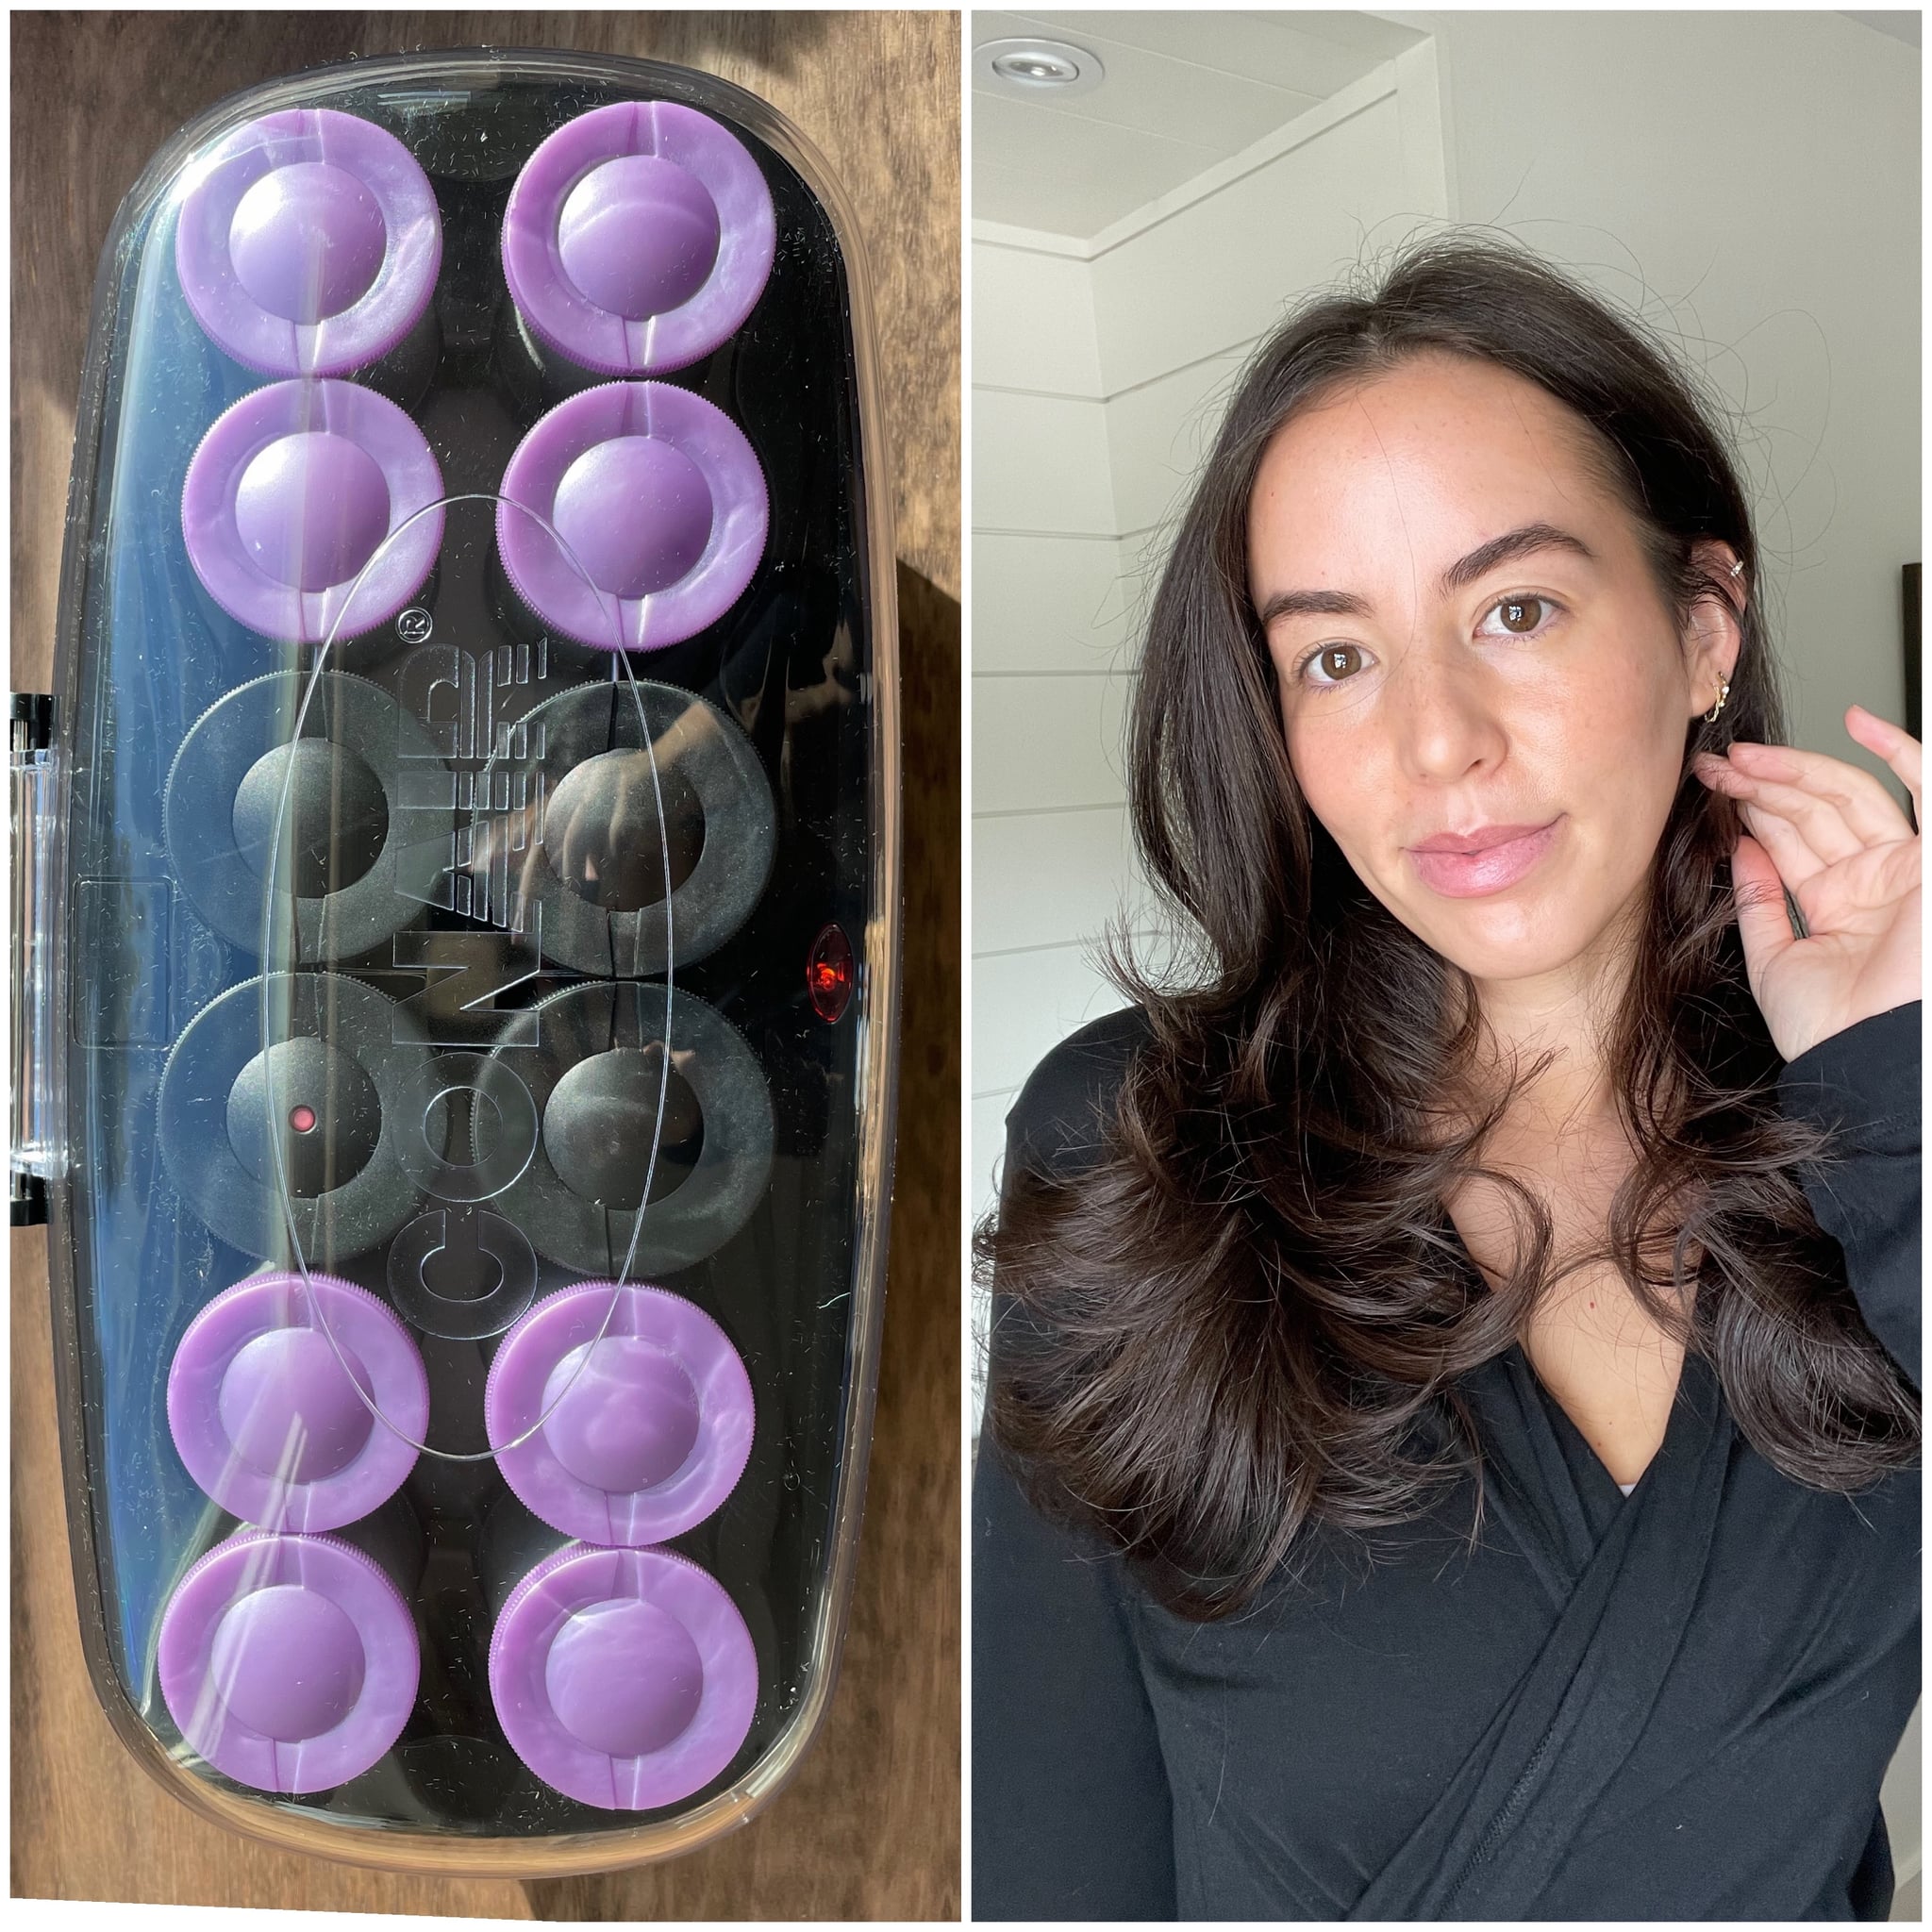 I Tried the Hot Rollers Taking Over TikTok For '90s Hair | POPSUGAR Beauty